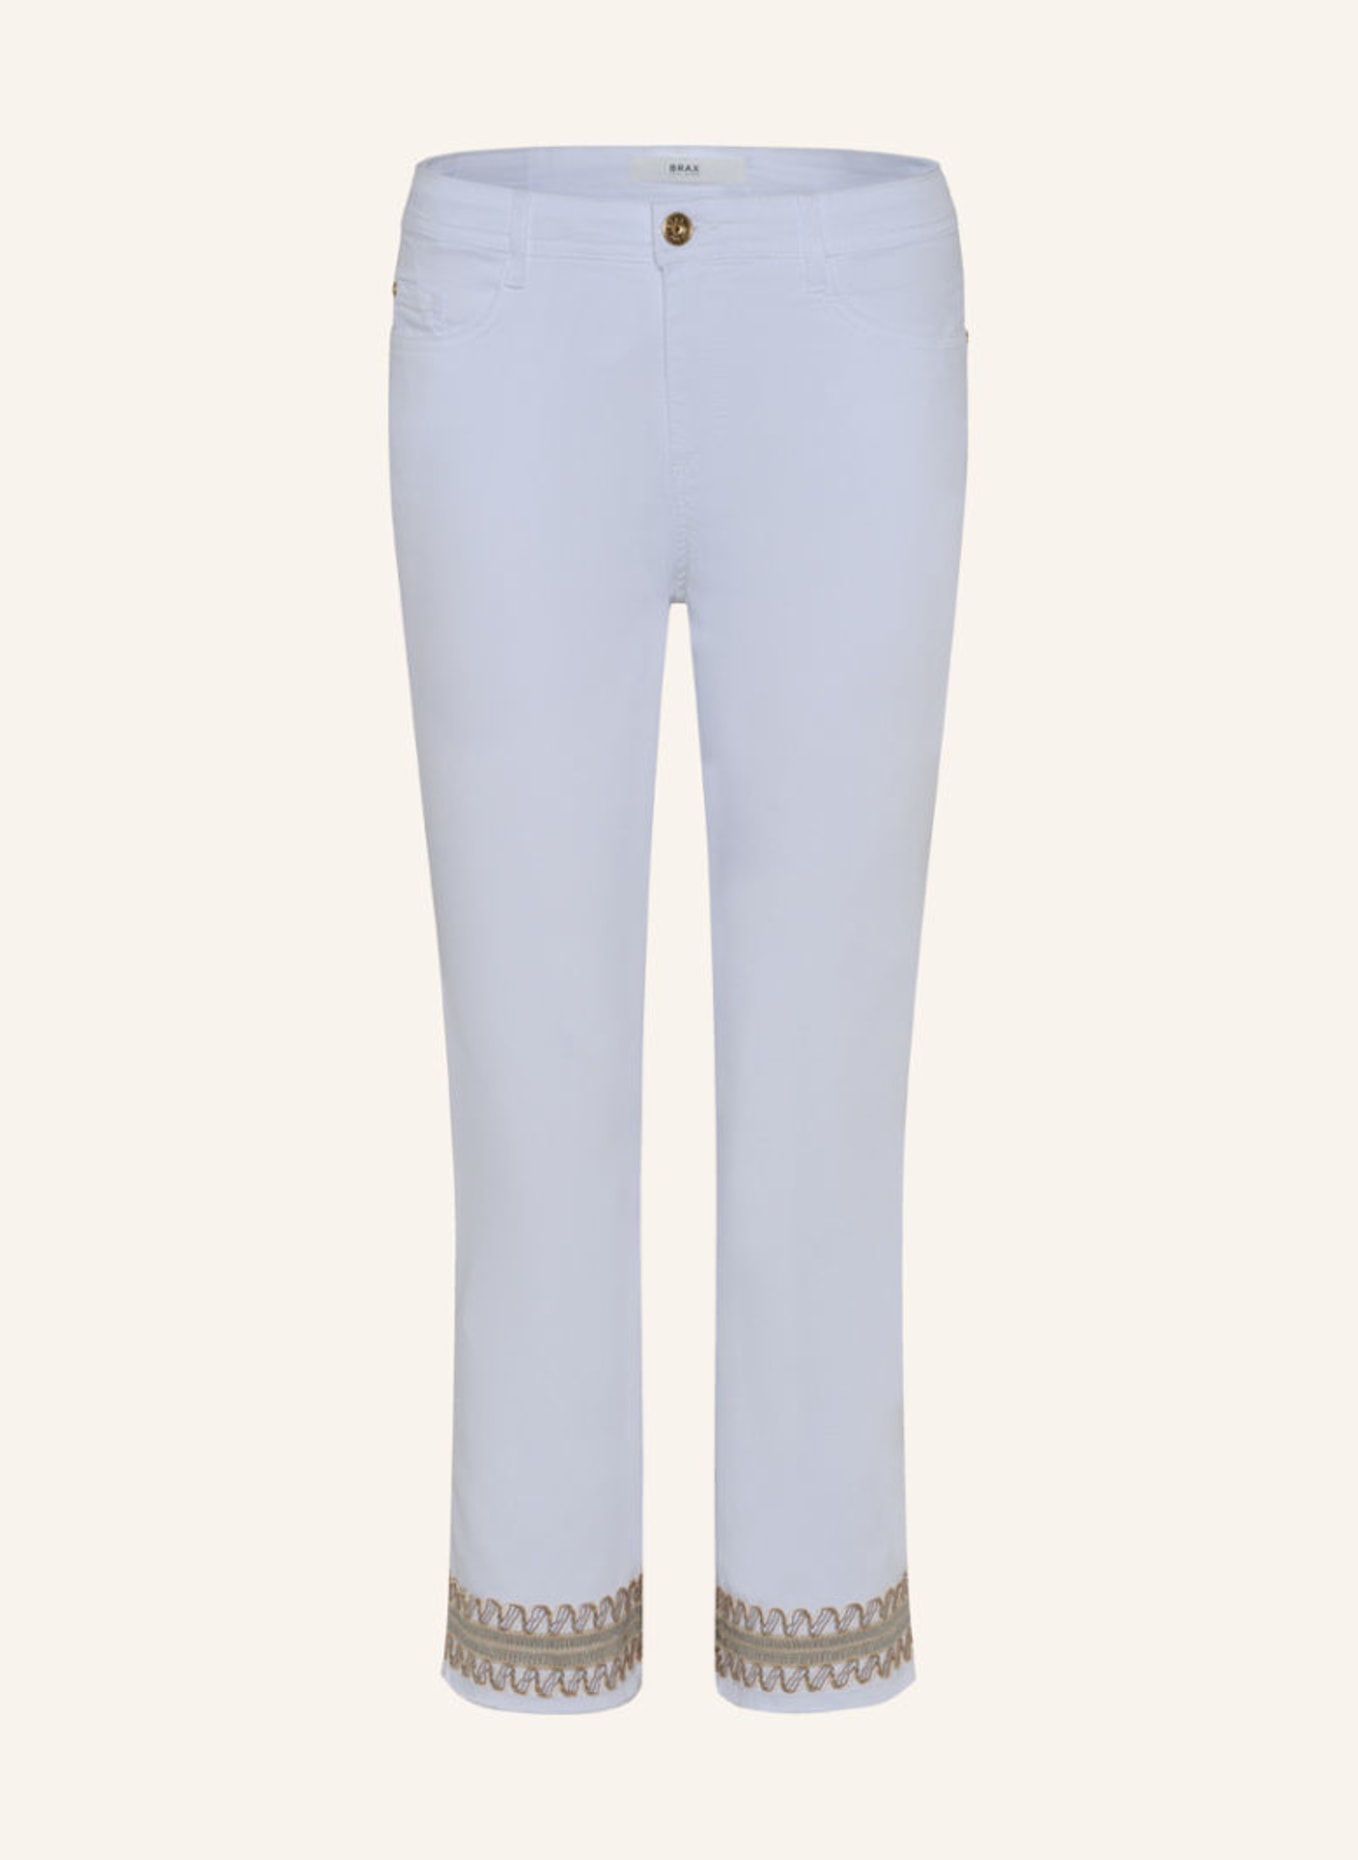 BRAX Jeans STYLE MARY S, Farbe: WEISS (Bild 1)